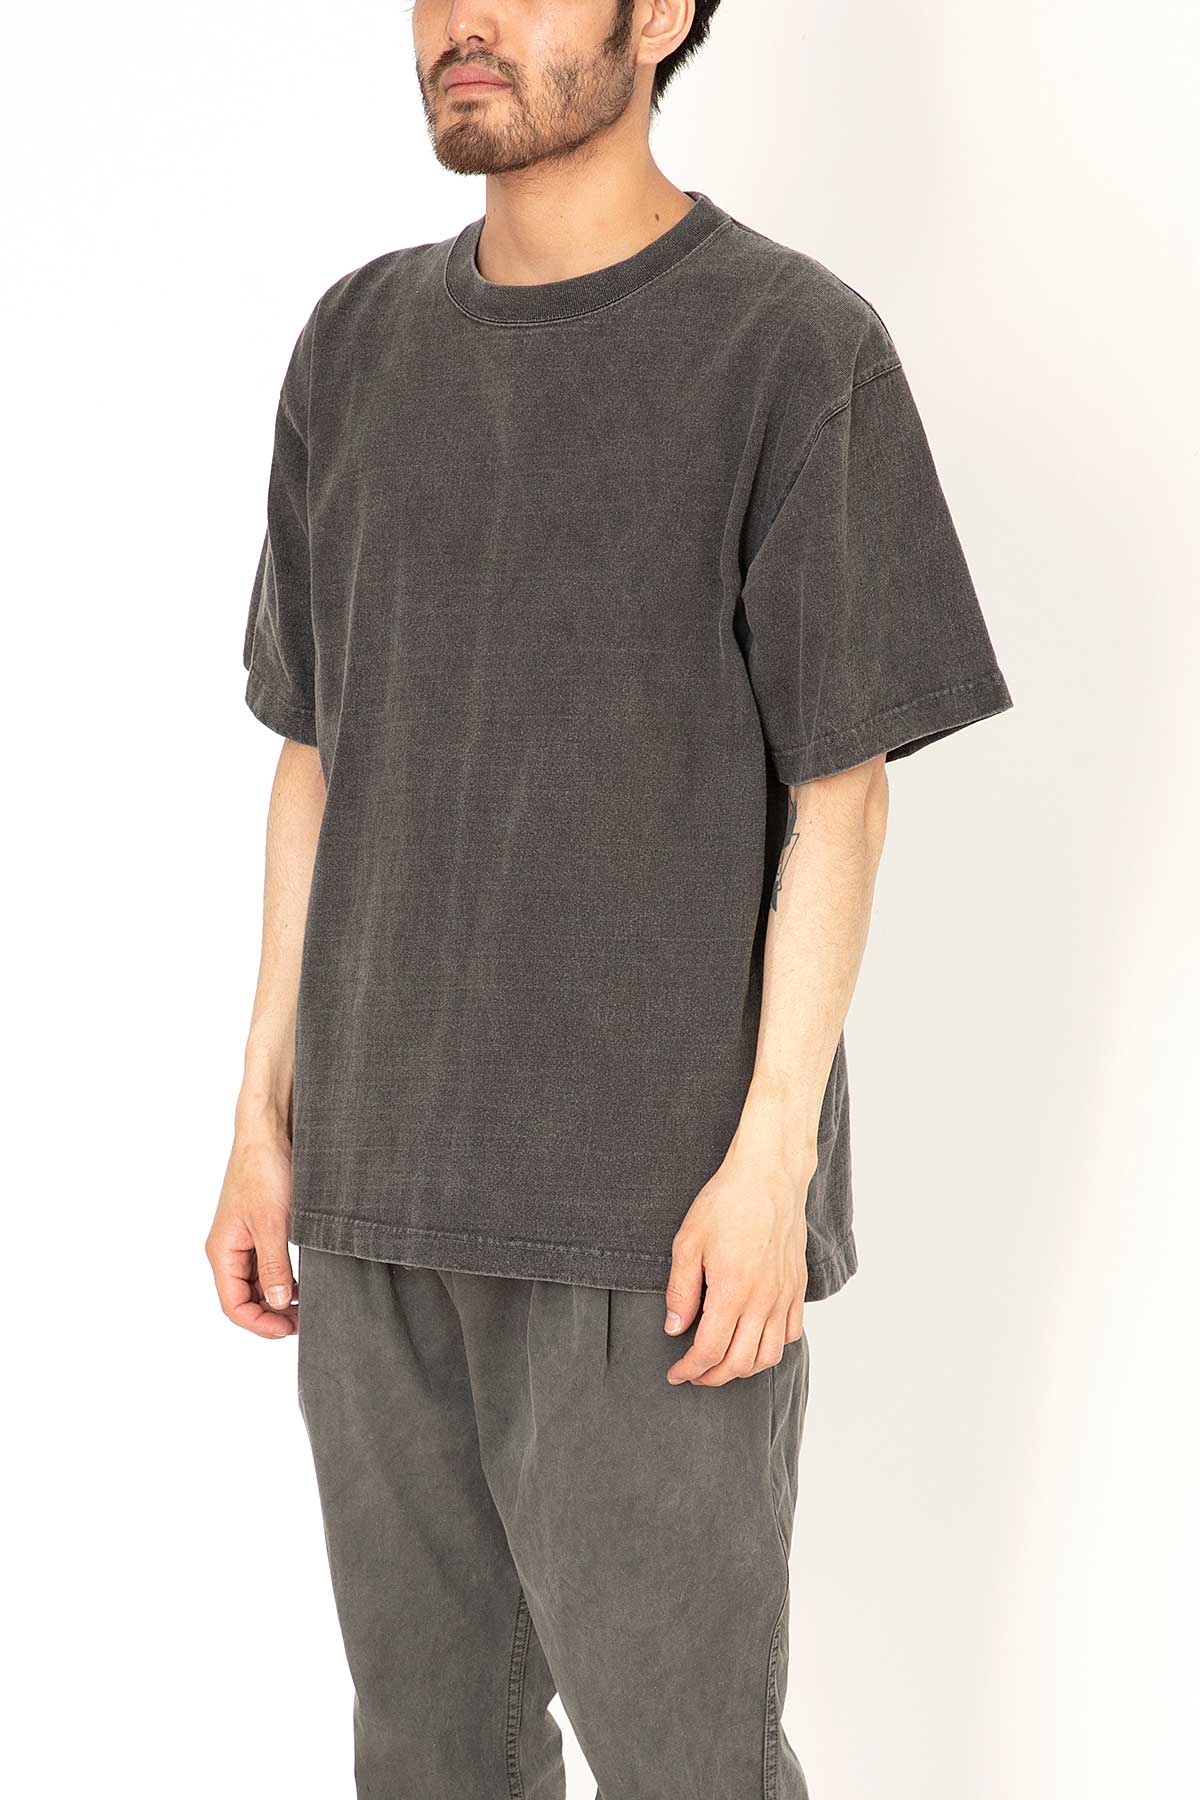 ARTISAN S/S CREW NECK TEE COTTON HEAVYWEIGHT JERSEY CHARCOAL DYED